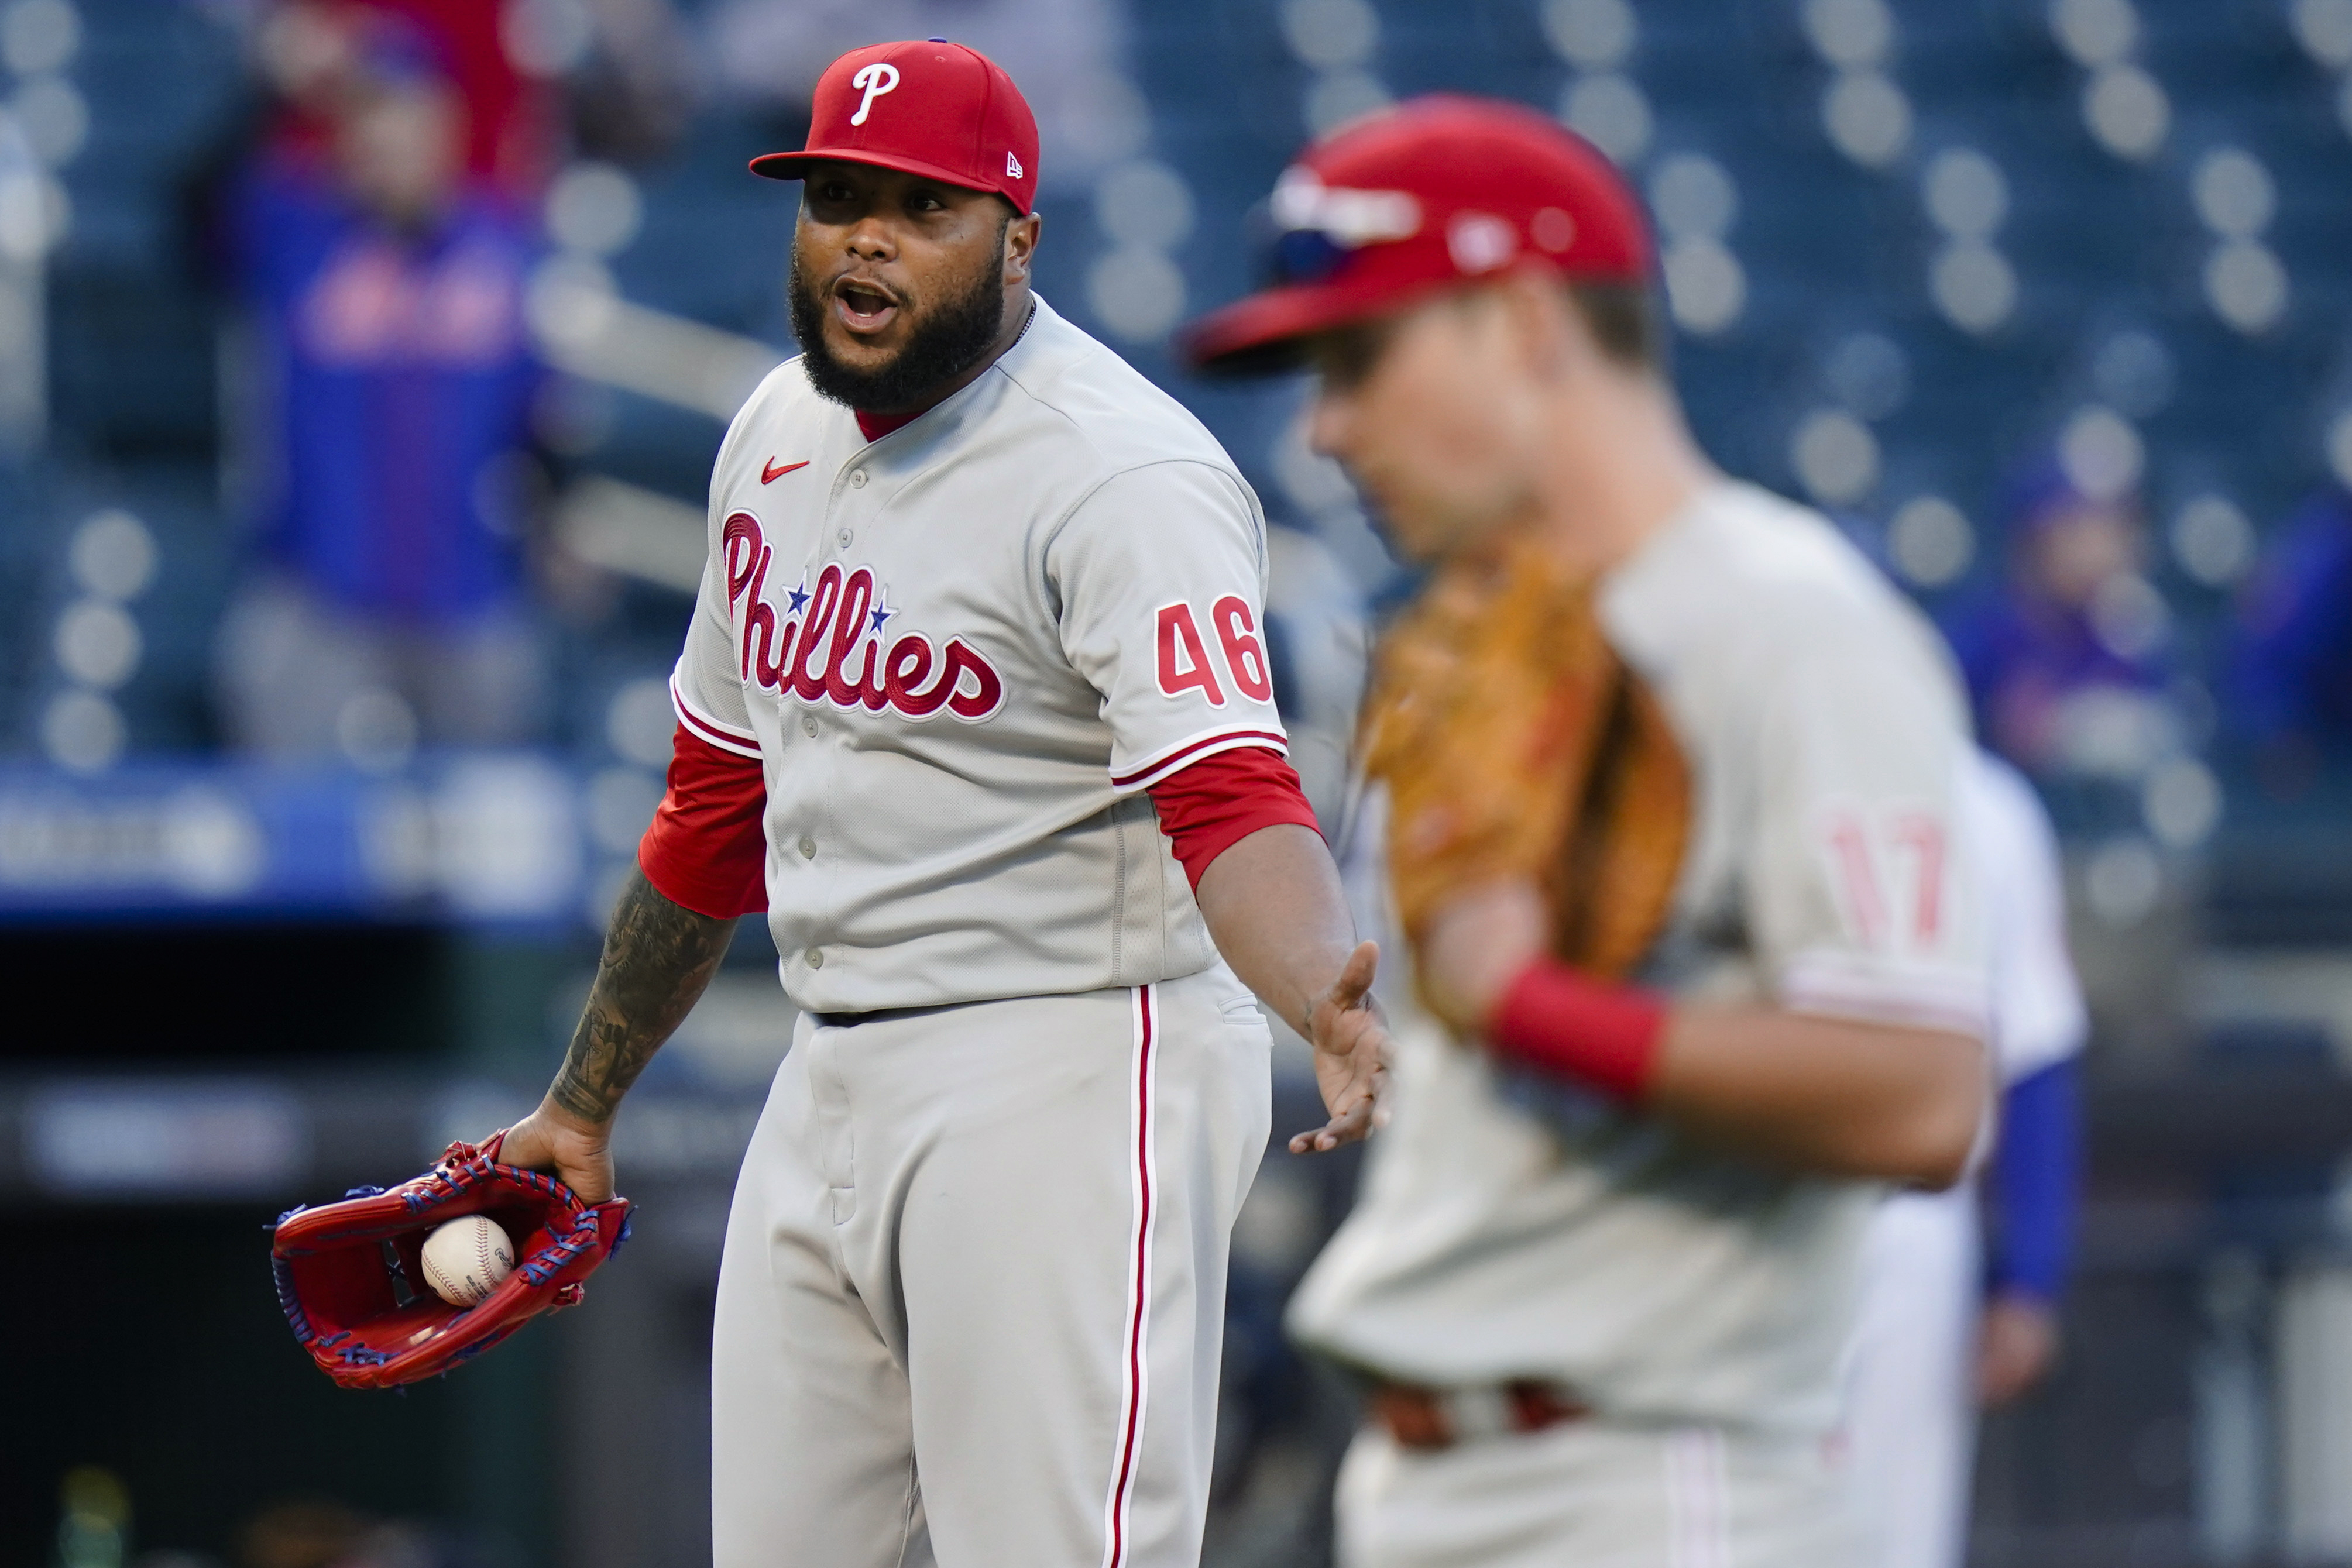 Phillies LHP Alvarado suspended 3 games for dustup with Mets